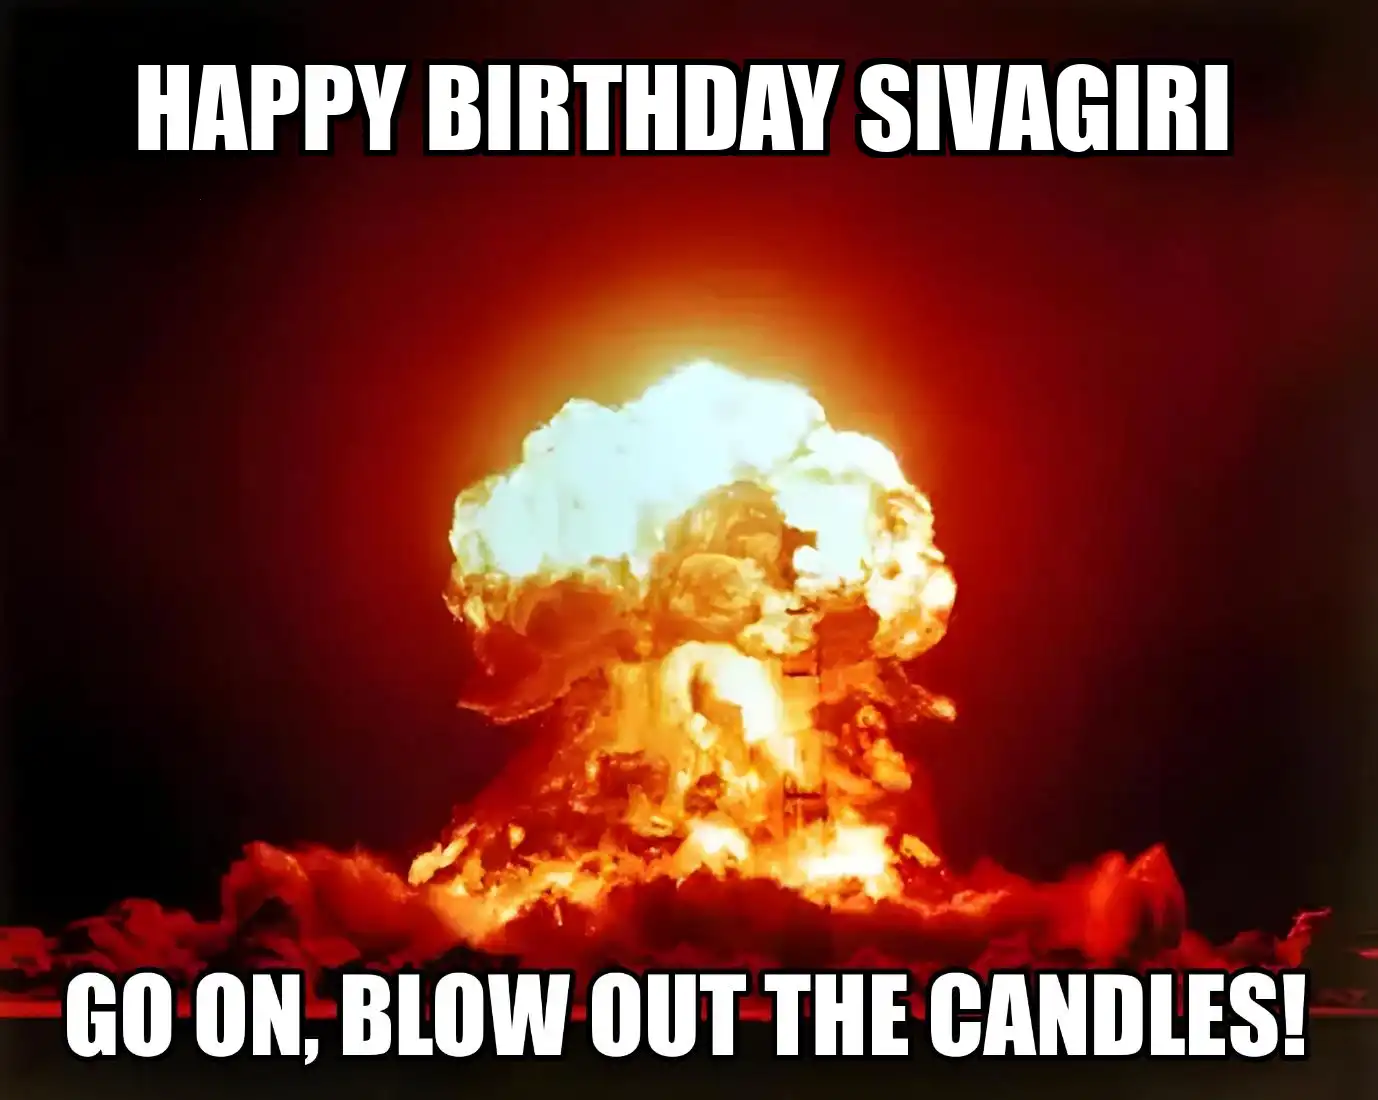 Happy Birthday Sivagiri Go On Blow Out The Candles Meme